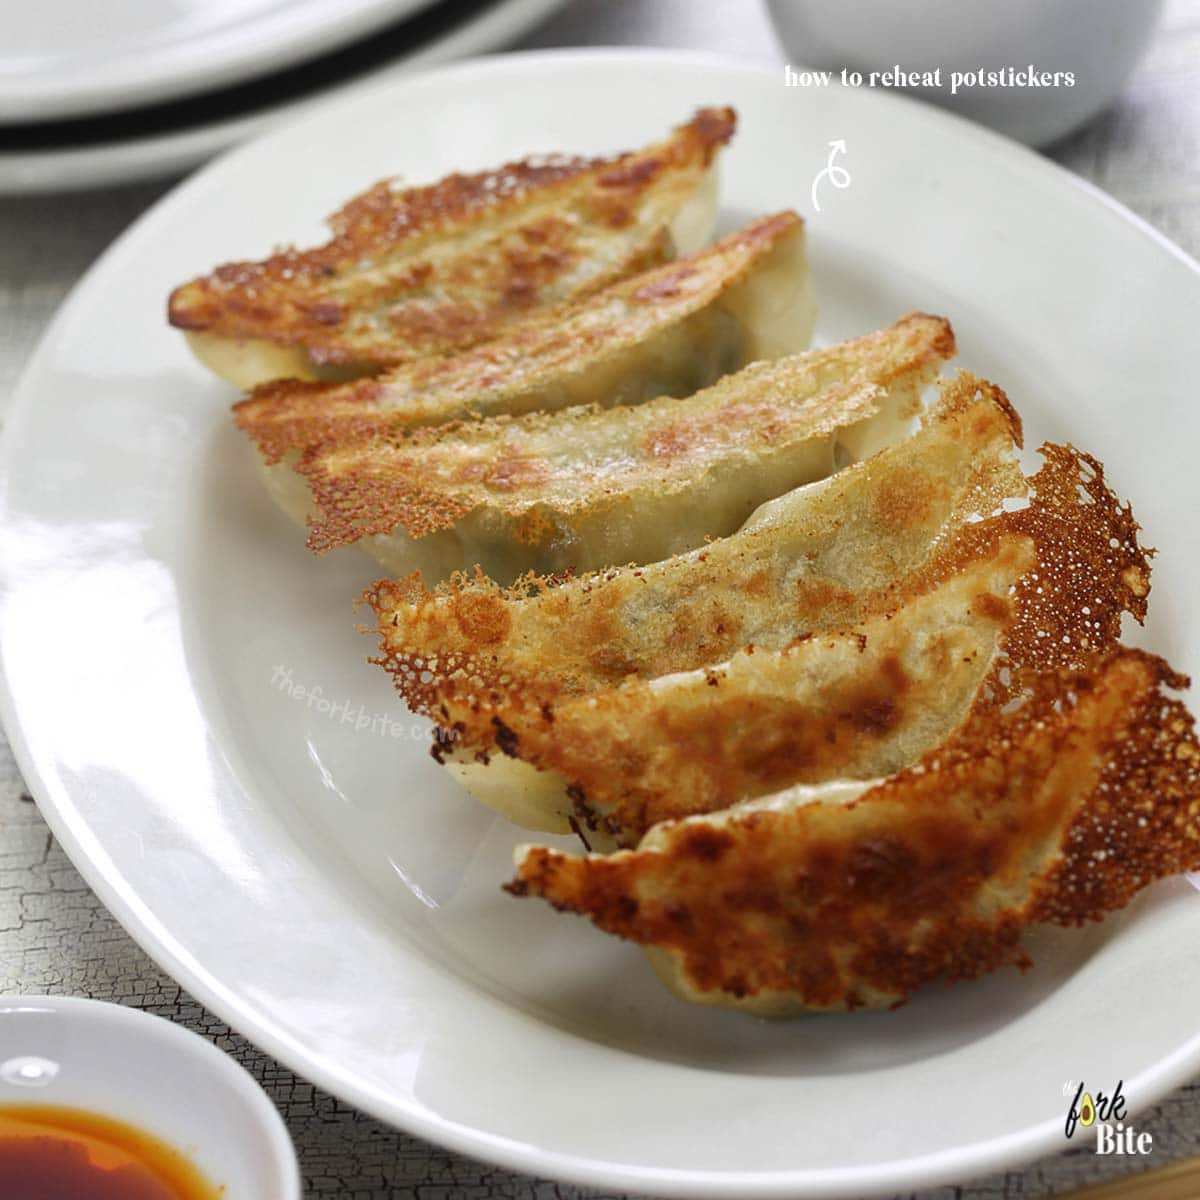 If you prefer crispy dumplings, you need to steam-fry them. It’s the traditional way of cooking Japanese style gyoza, or Chinese style guo tie.